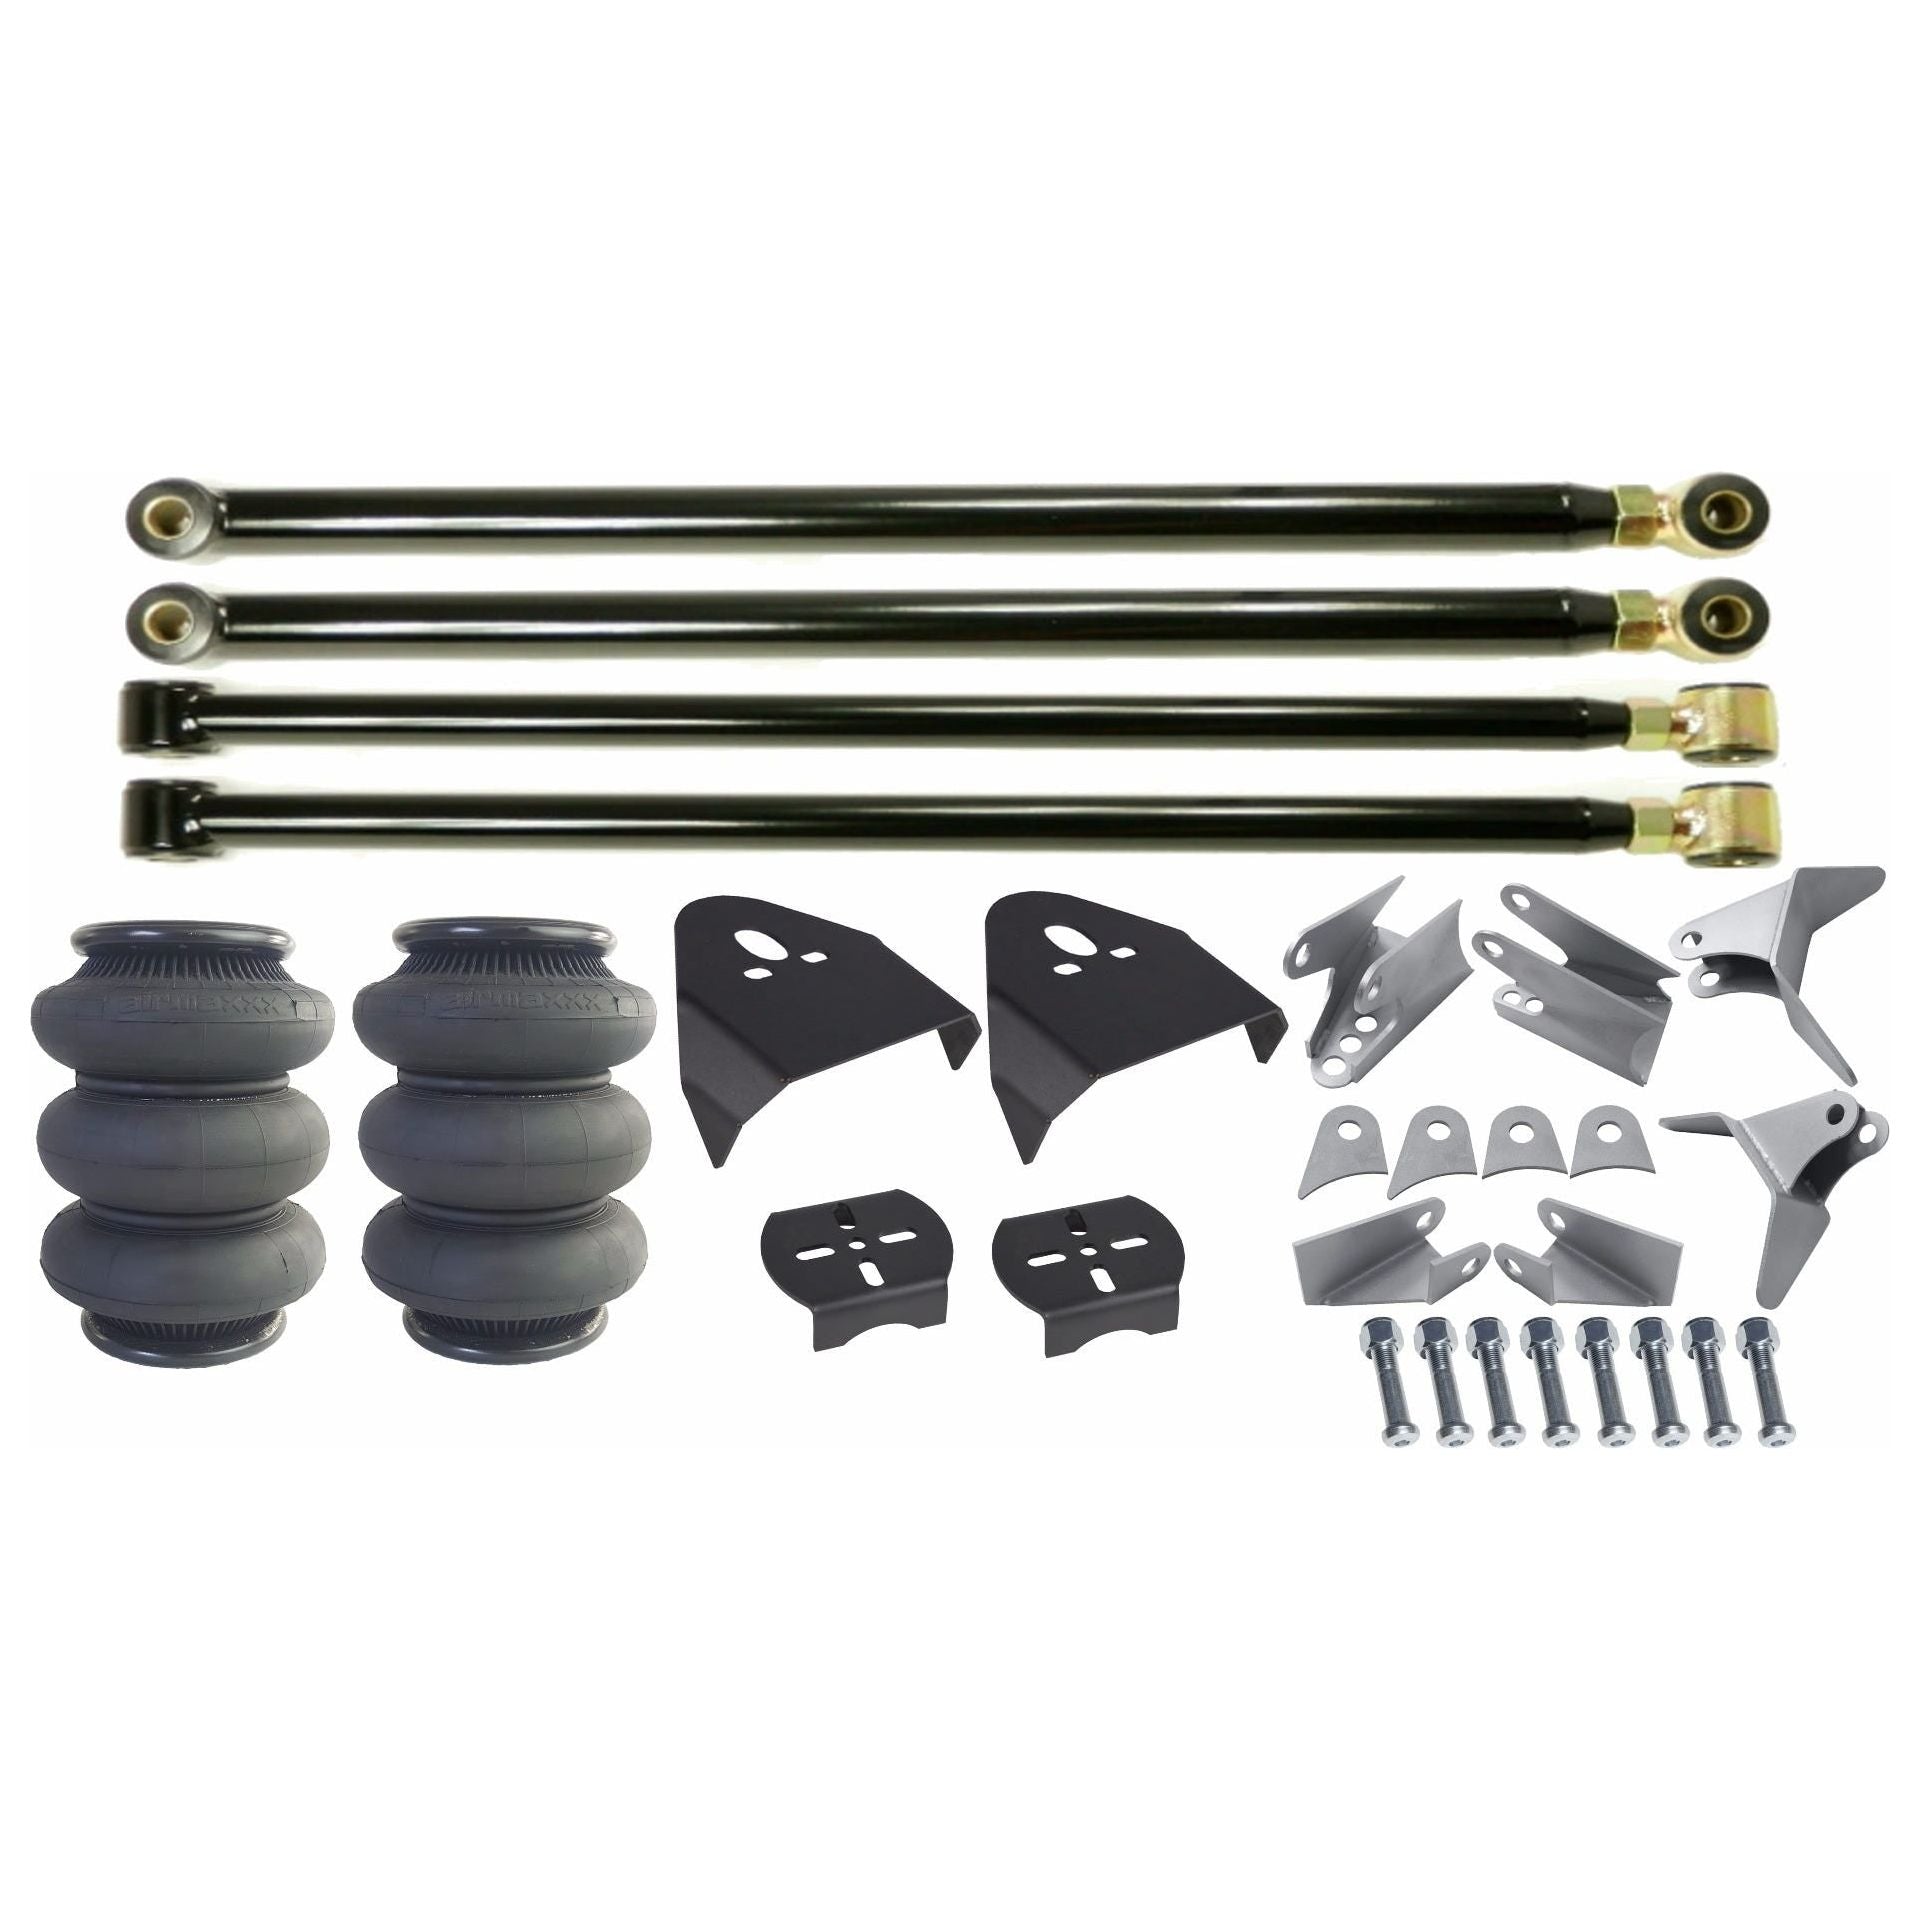 Triangulated Rear 4 Link Suspension Kit, Triple Bellow 2600 Air Bags & Over Axle Brackets